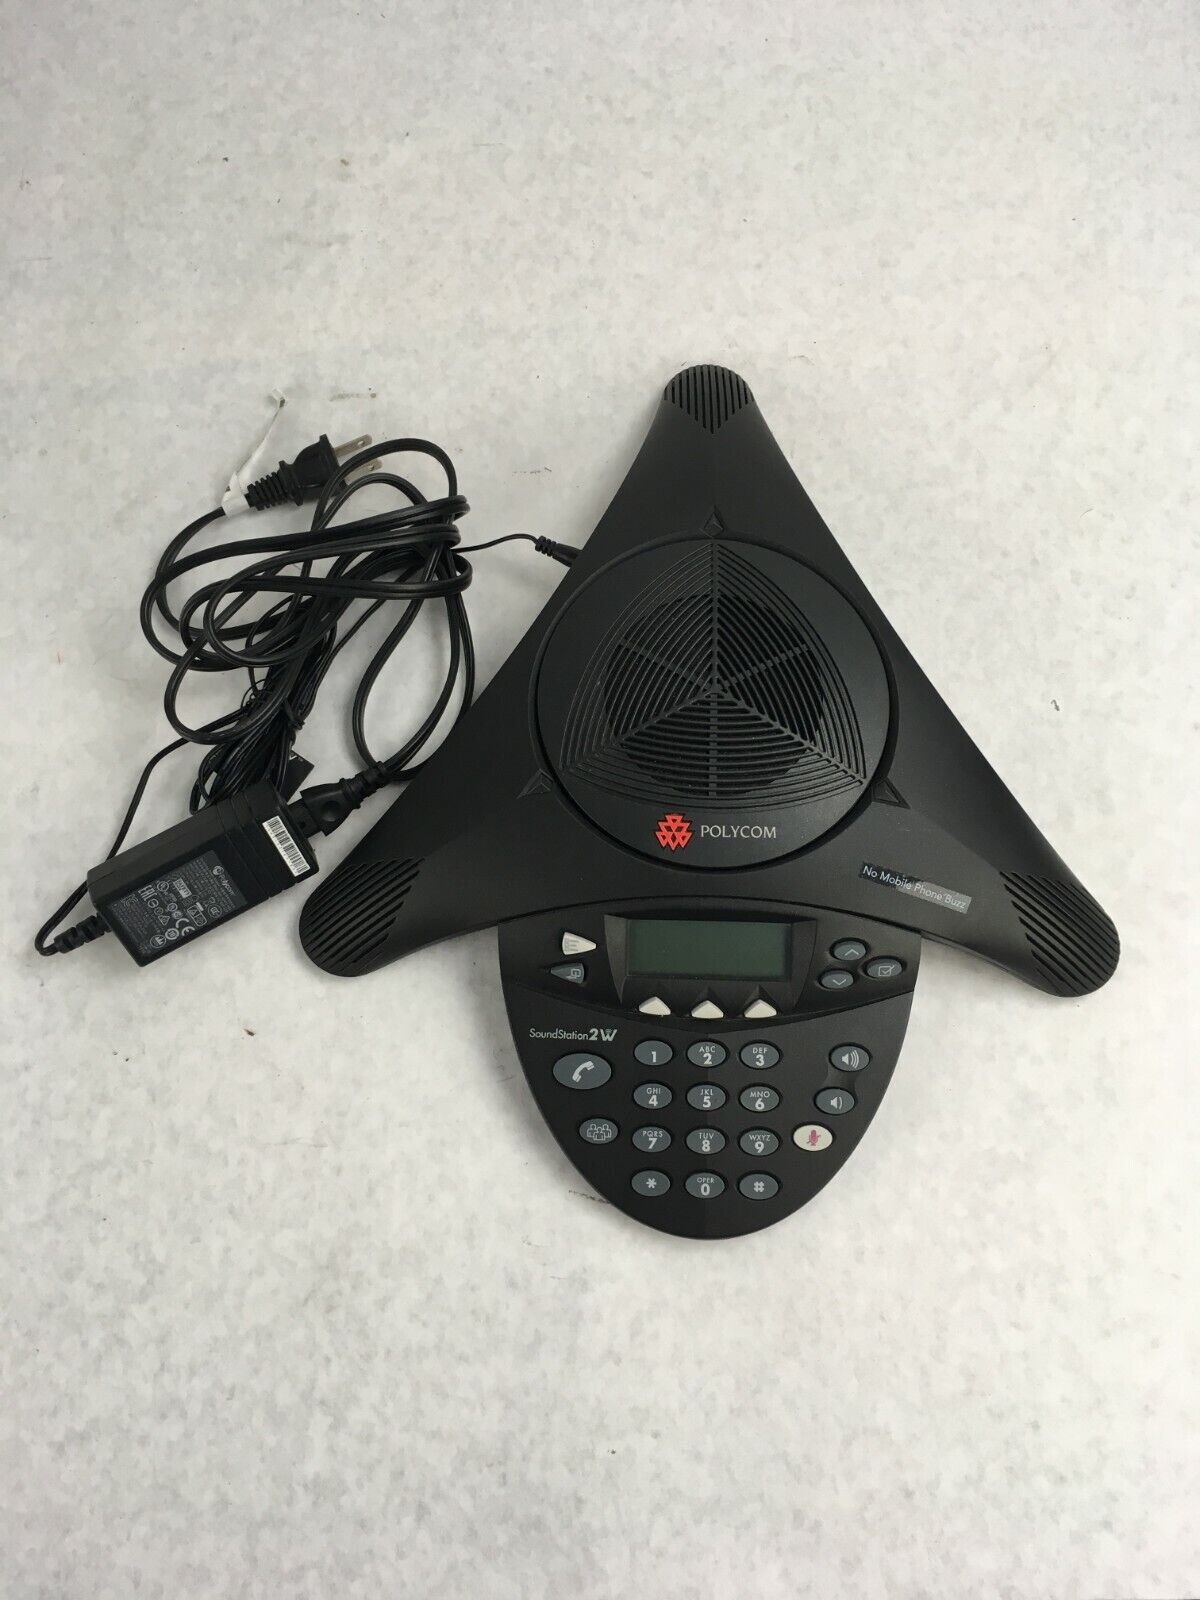 Polycom SoundStation 2W 2201-67880-160 Wireless Conference Phone With Power Cord